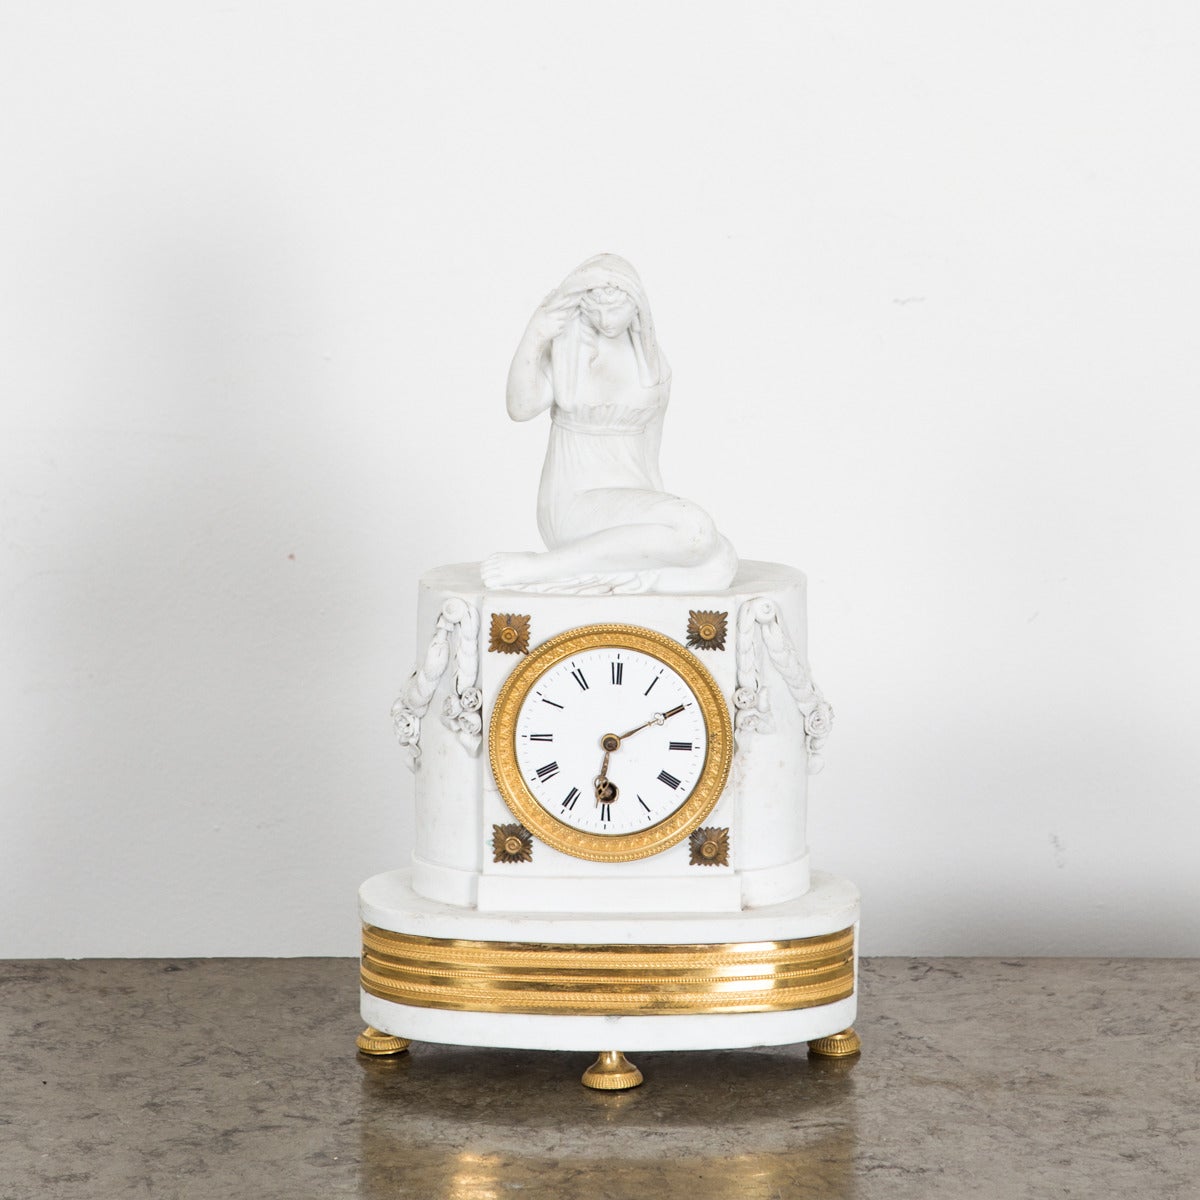 Mantle Clock French Neoclassical White Gilt bronze France. A mantle clock made in France during the Neoclassical period ca 1790-1810. White with gilt bronze details. Decorated with laurel swags 